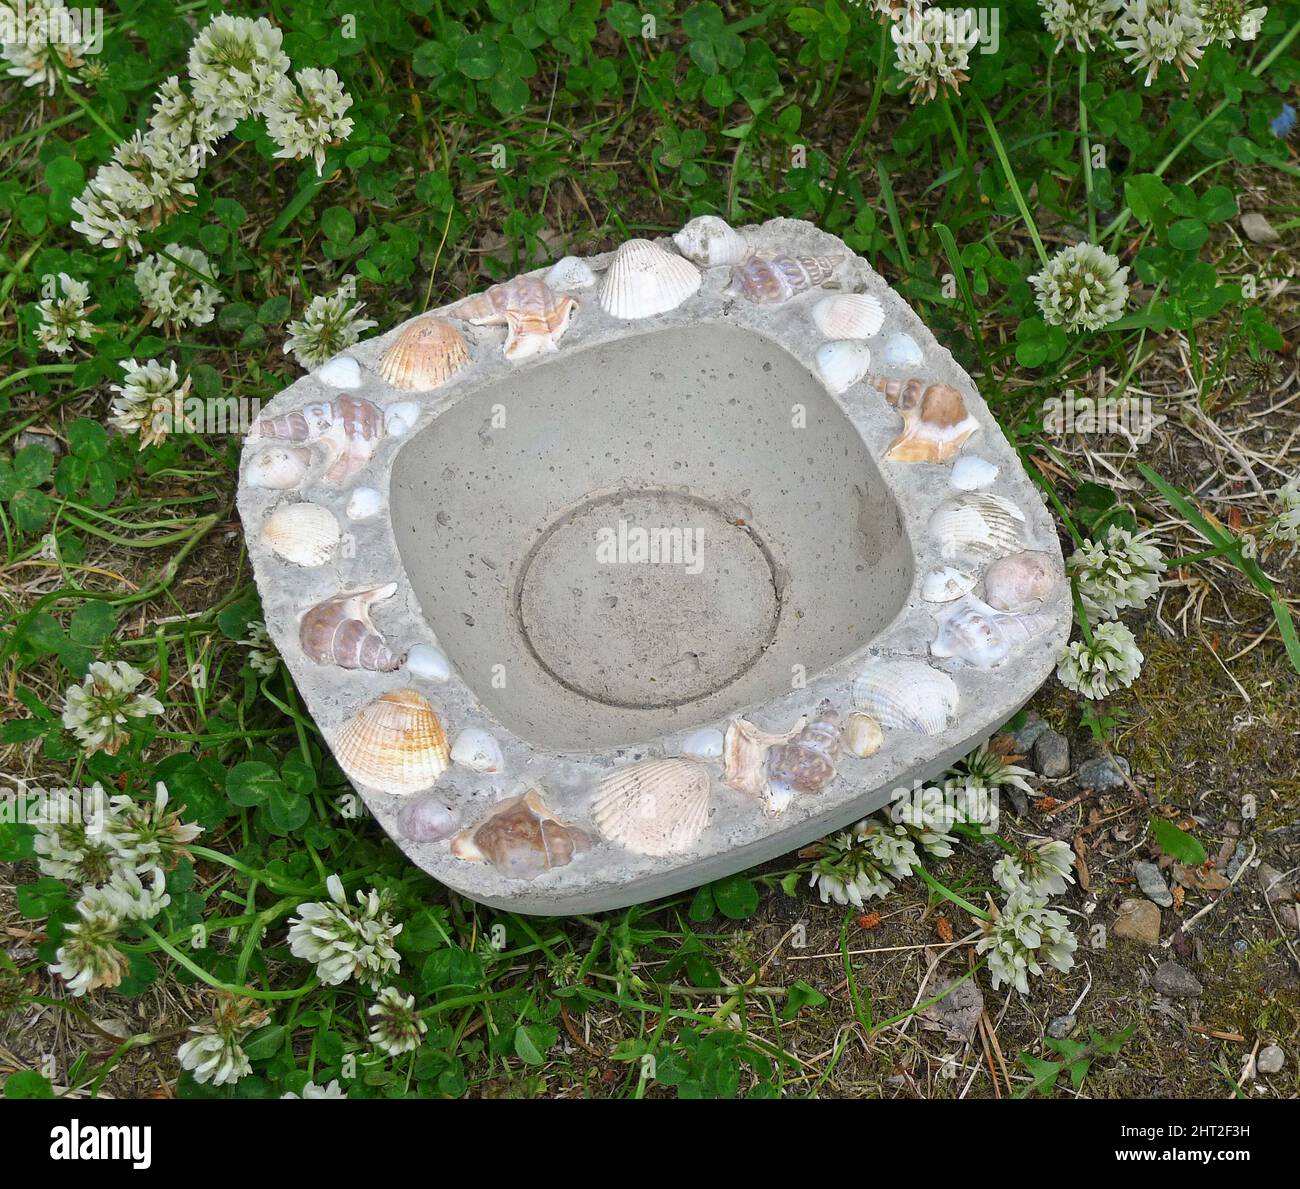 Concrete bowl with mussel shell and seashells Stock Photo